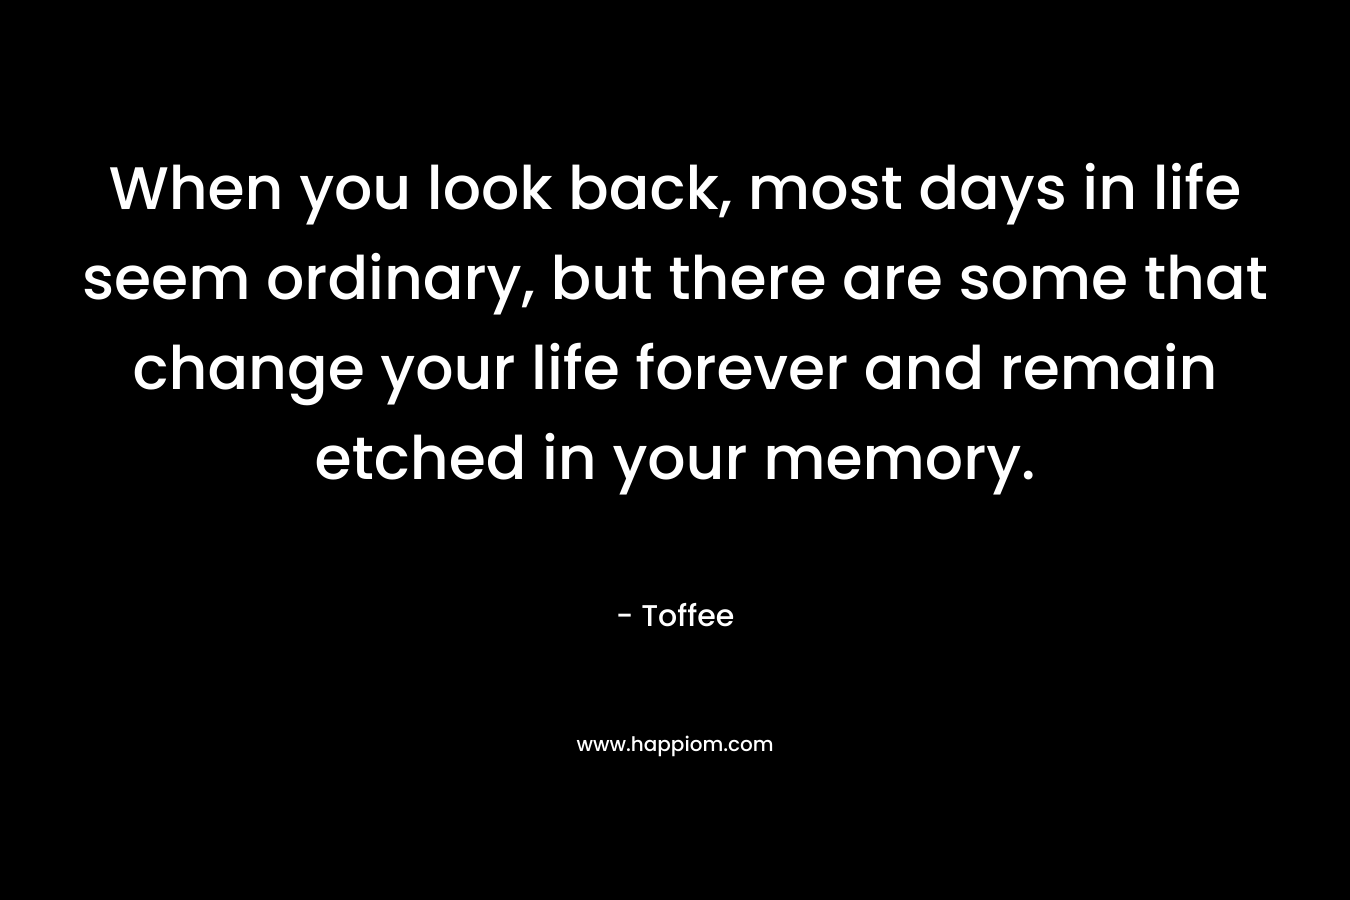 When you look back, most days in life seem ordinary, but there are some that change your life forever and remain etched in your memory.